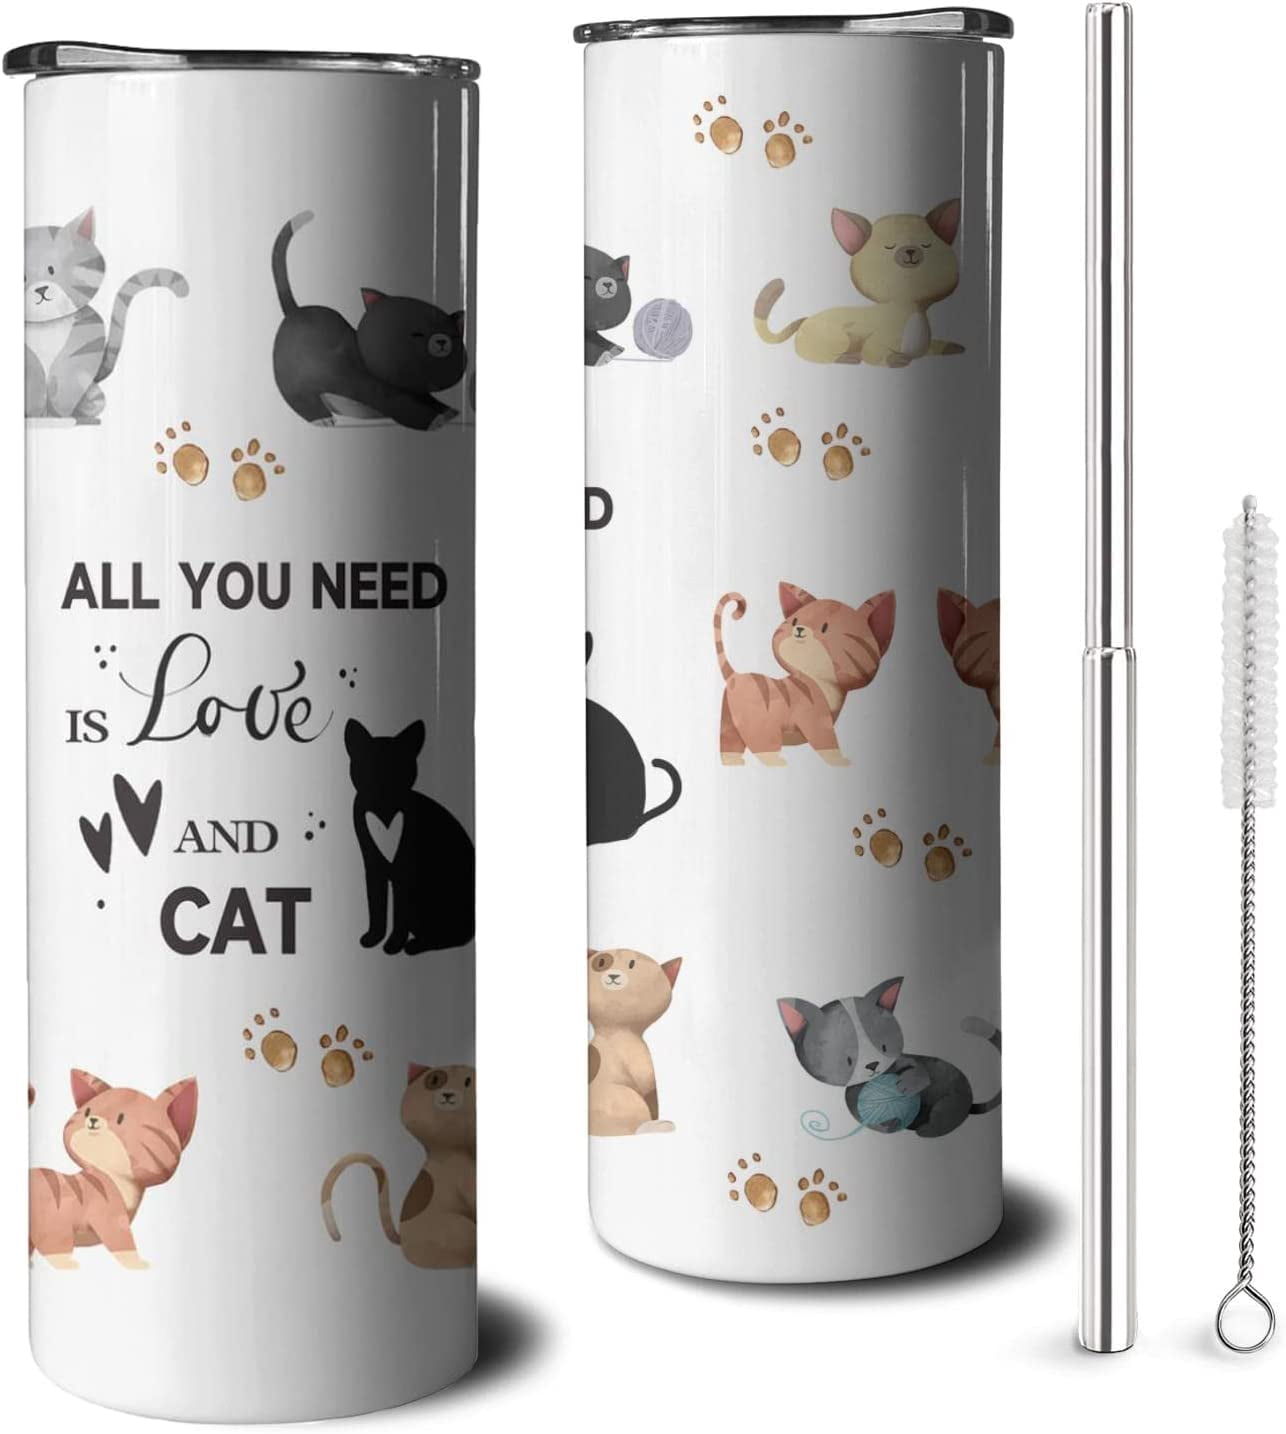 Goth Gifts for Women - Cat Gothic Tumbler Coffee Mug for Women - Cat Lover  Gifts for Women - 20 Oz Stainless Steel Insulated Cat Cup With Lid and